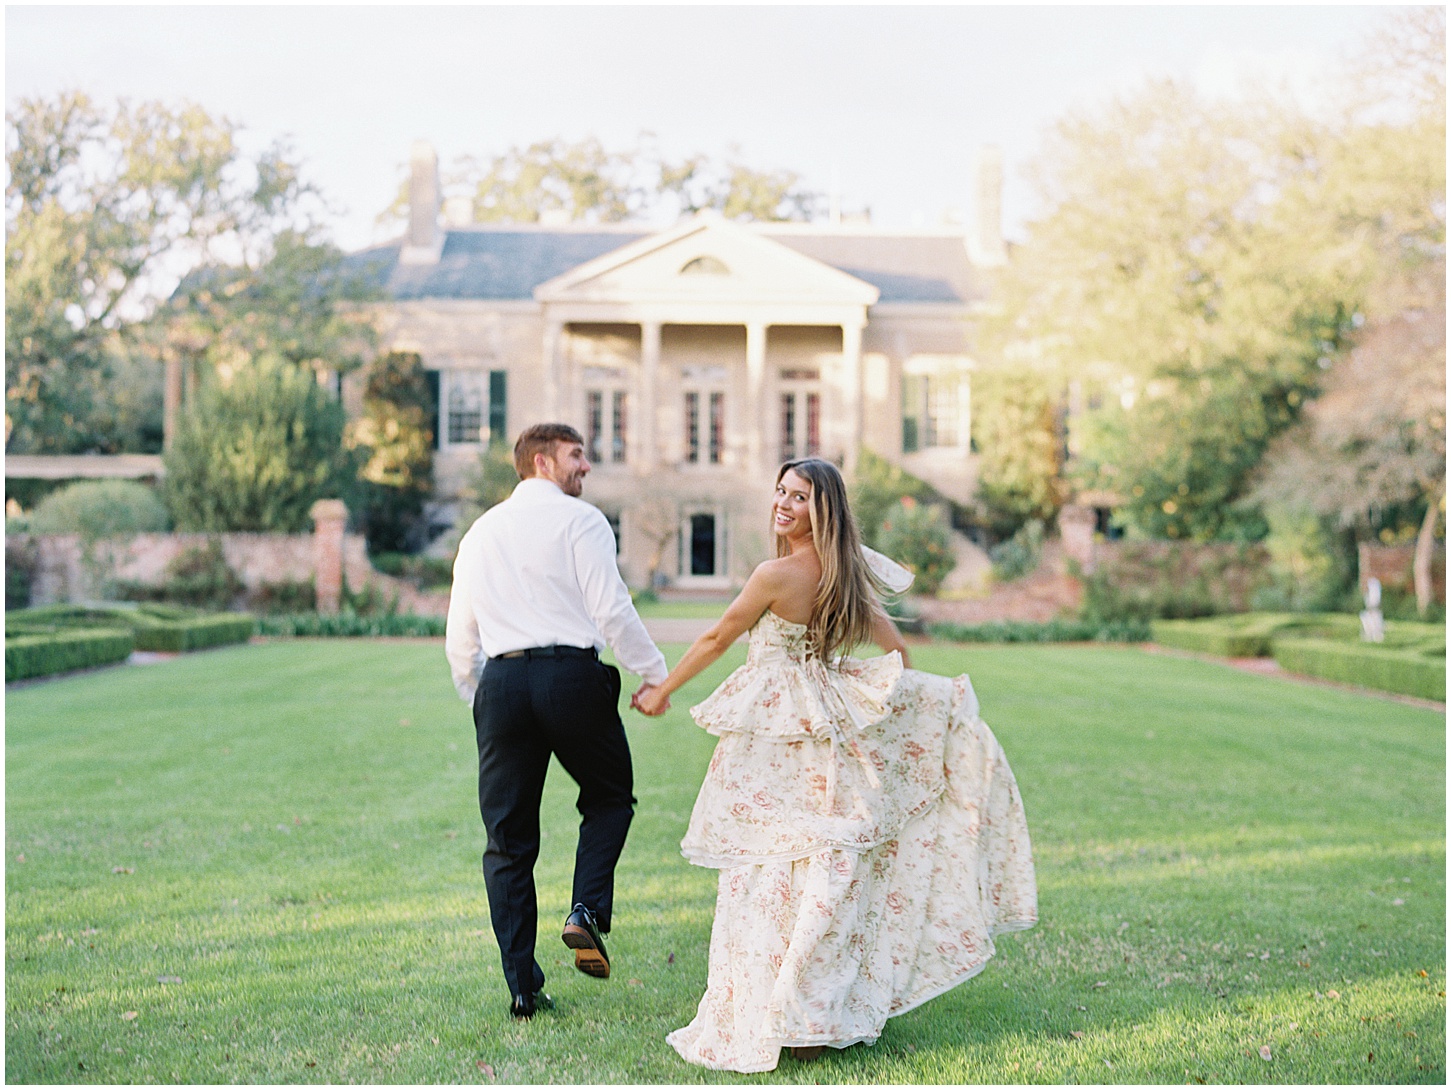 Couple wearing a suit and long dress run through open field during sunset at Longue Vue House and Gardens engagement session in New Orleans, Louisiana